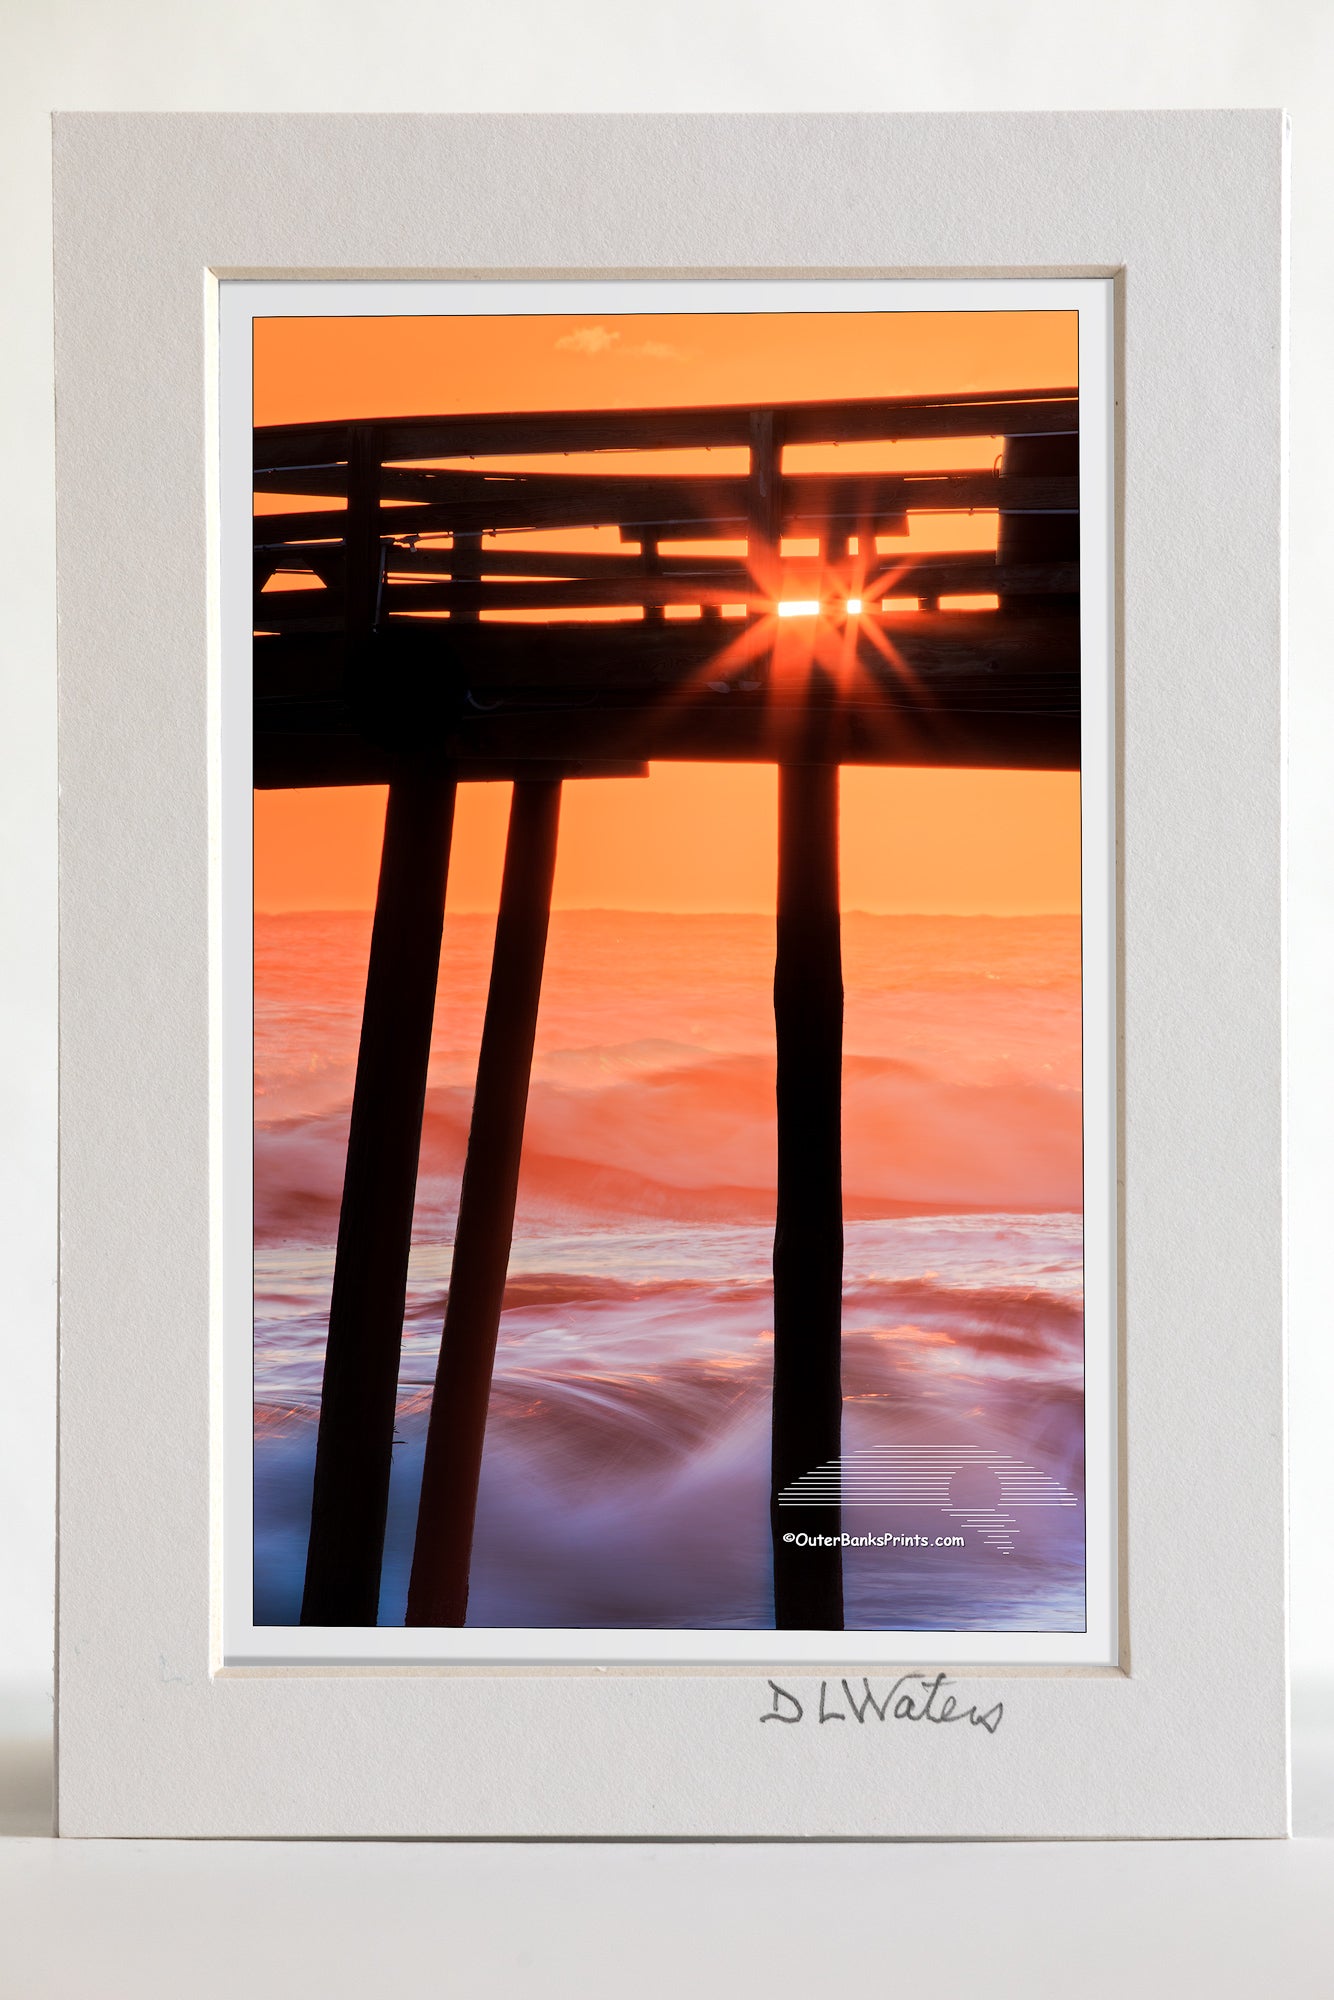 4 x 6 luster print in a 5 x 7 ivory mat of Avalon fishing silhouetted against breaking waves at sunrise.